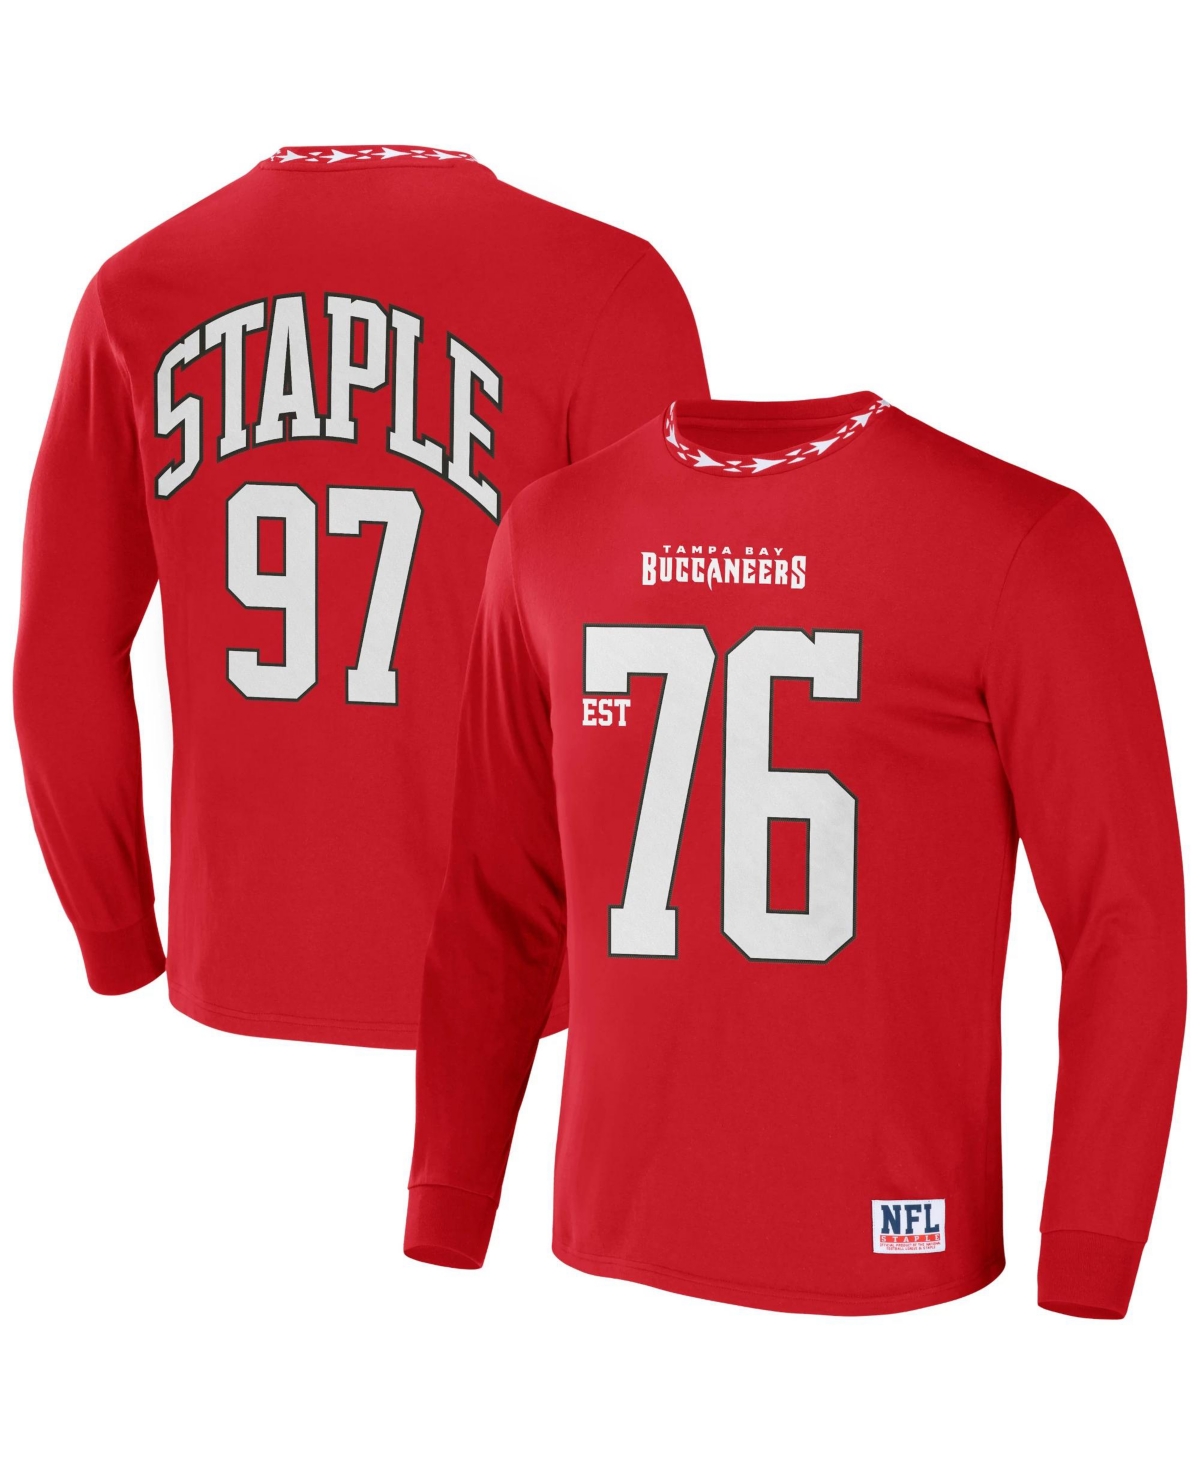 Men's Nfl X Staple Red Tampa Bay Buccaneers Core Long Sleeve Jersey Style T-shirt - Red